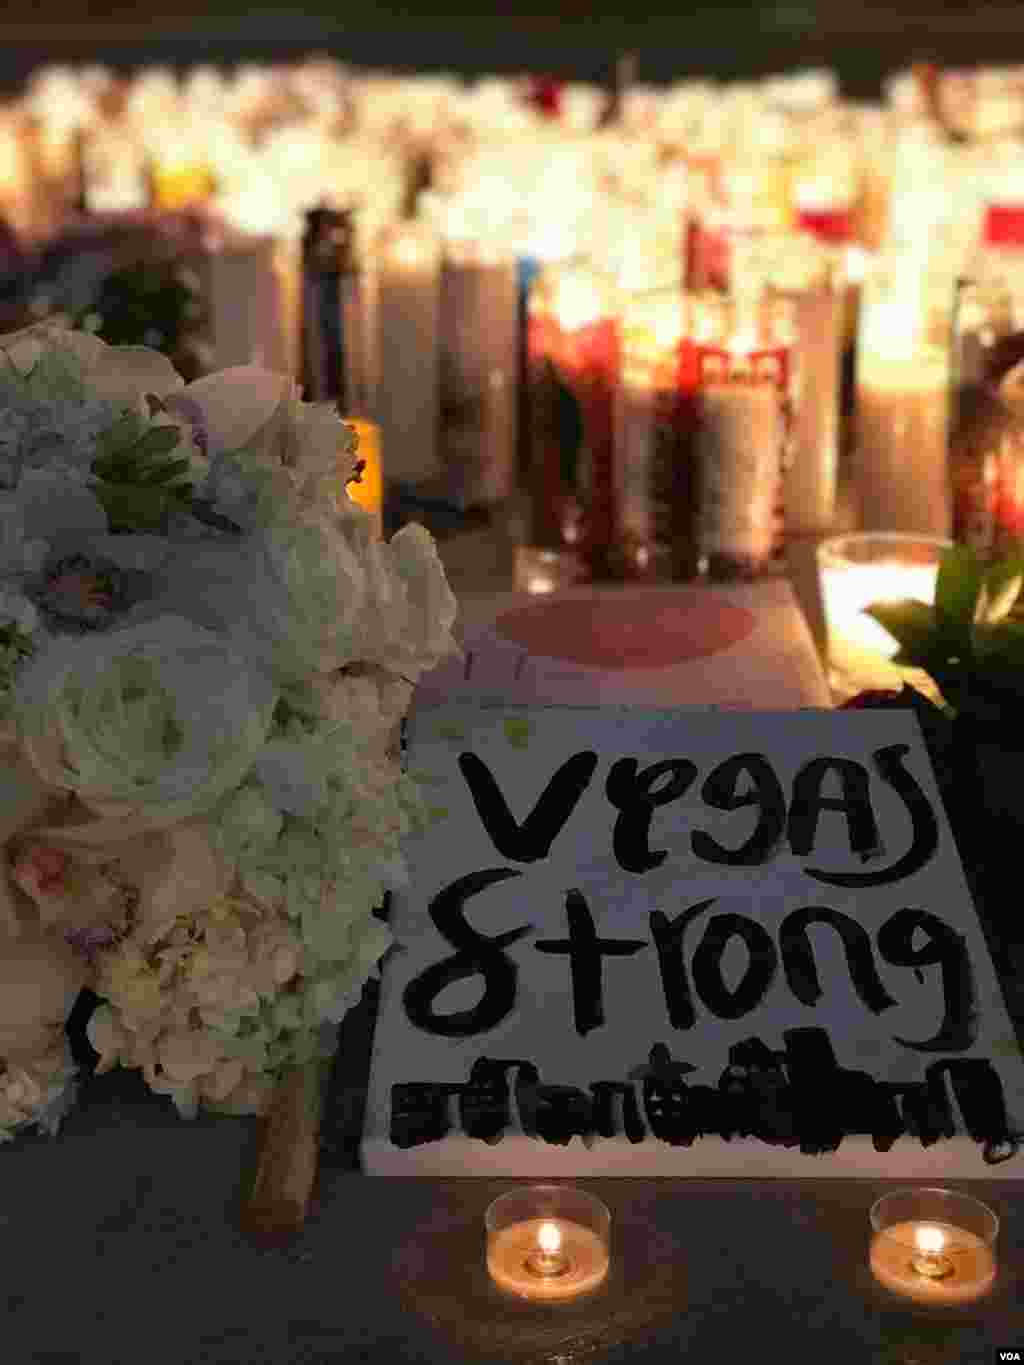 Vegas Strong sign seen at candlelight vigil for victims of Las Vegas shooting, Oct. 2, 2017. (Photo: S. Dizayee / VOA Turkish Service) 